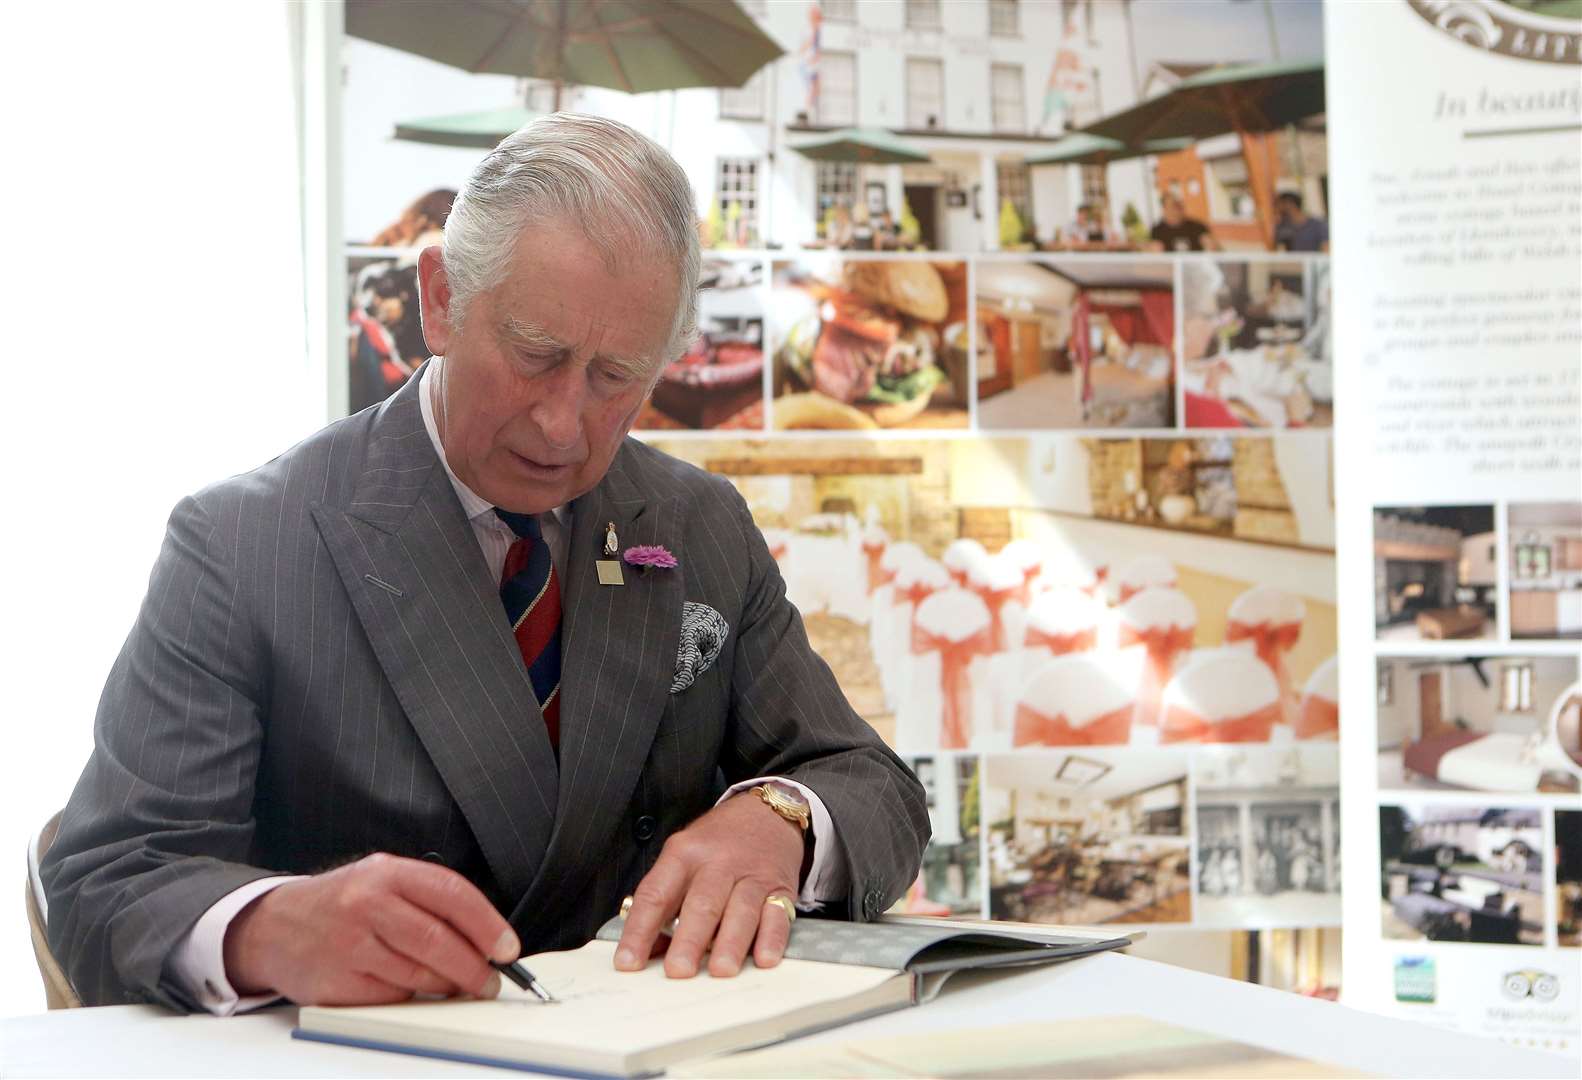 The then-Prince of Wales signed a book of his watercolours which were to be auctioned for charity (Steve Parsons/PA)